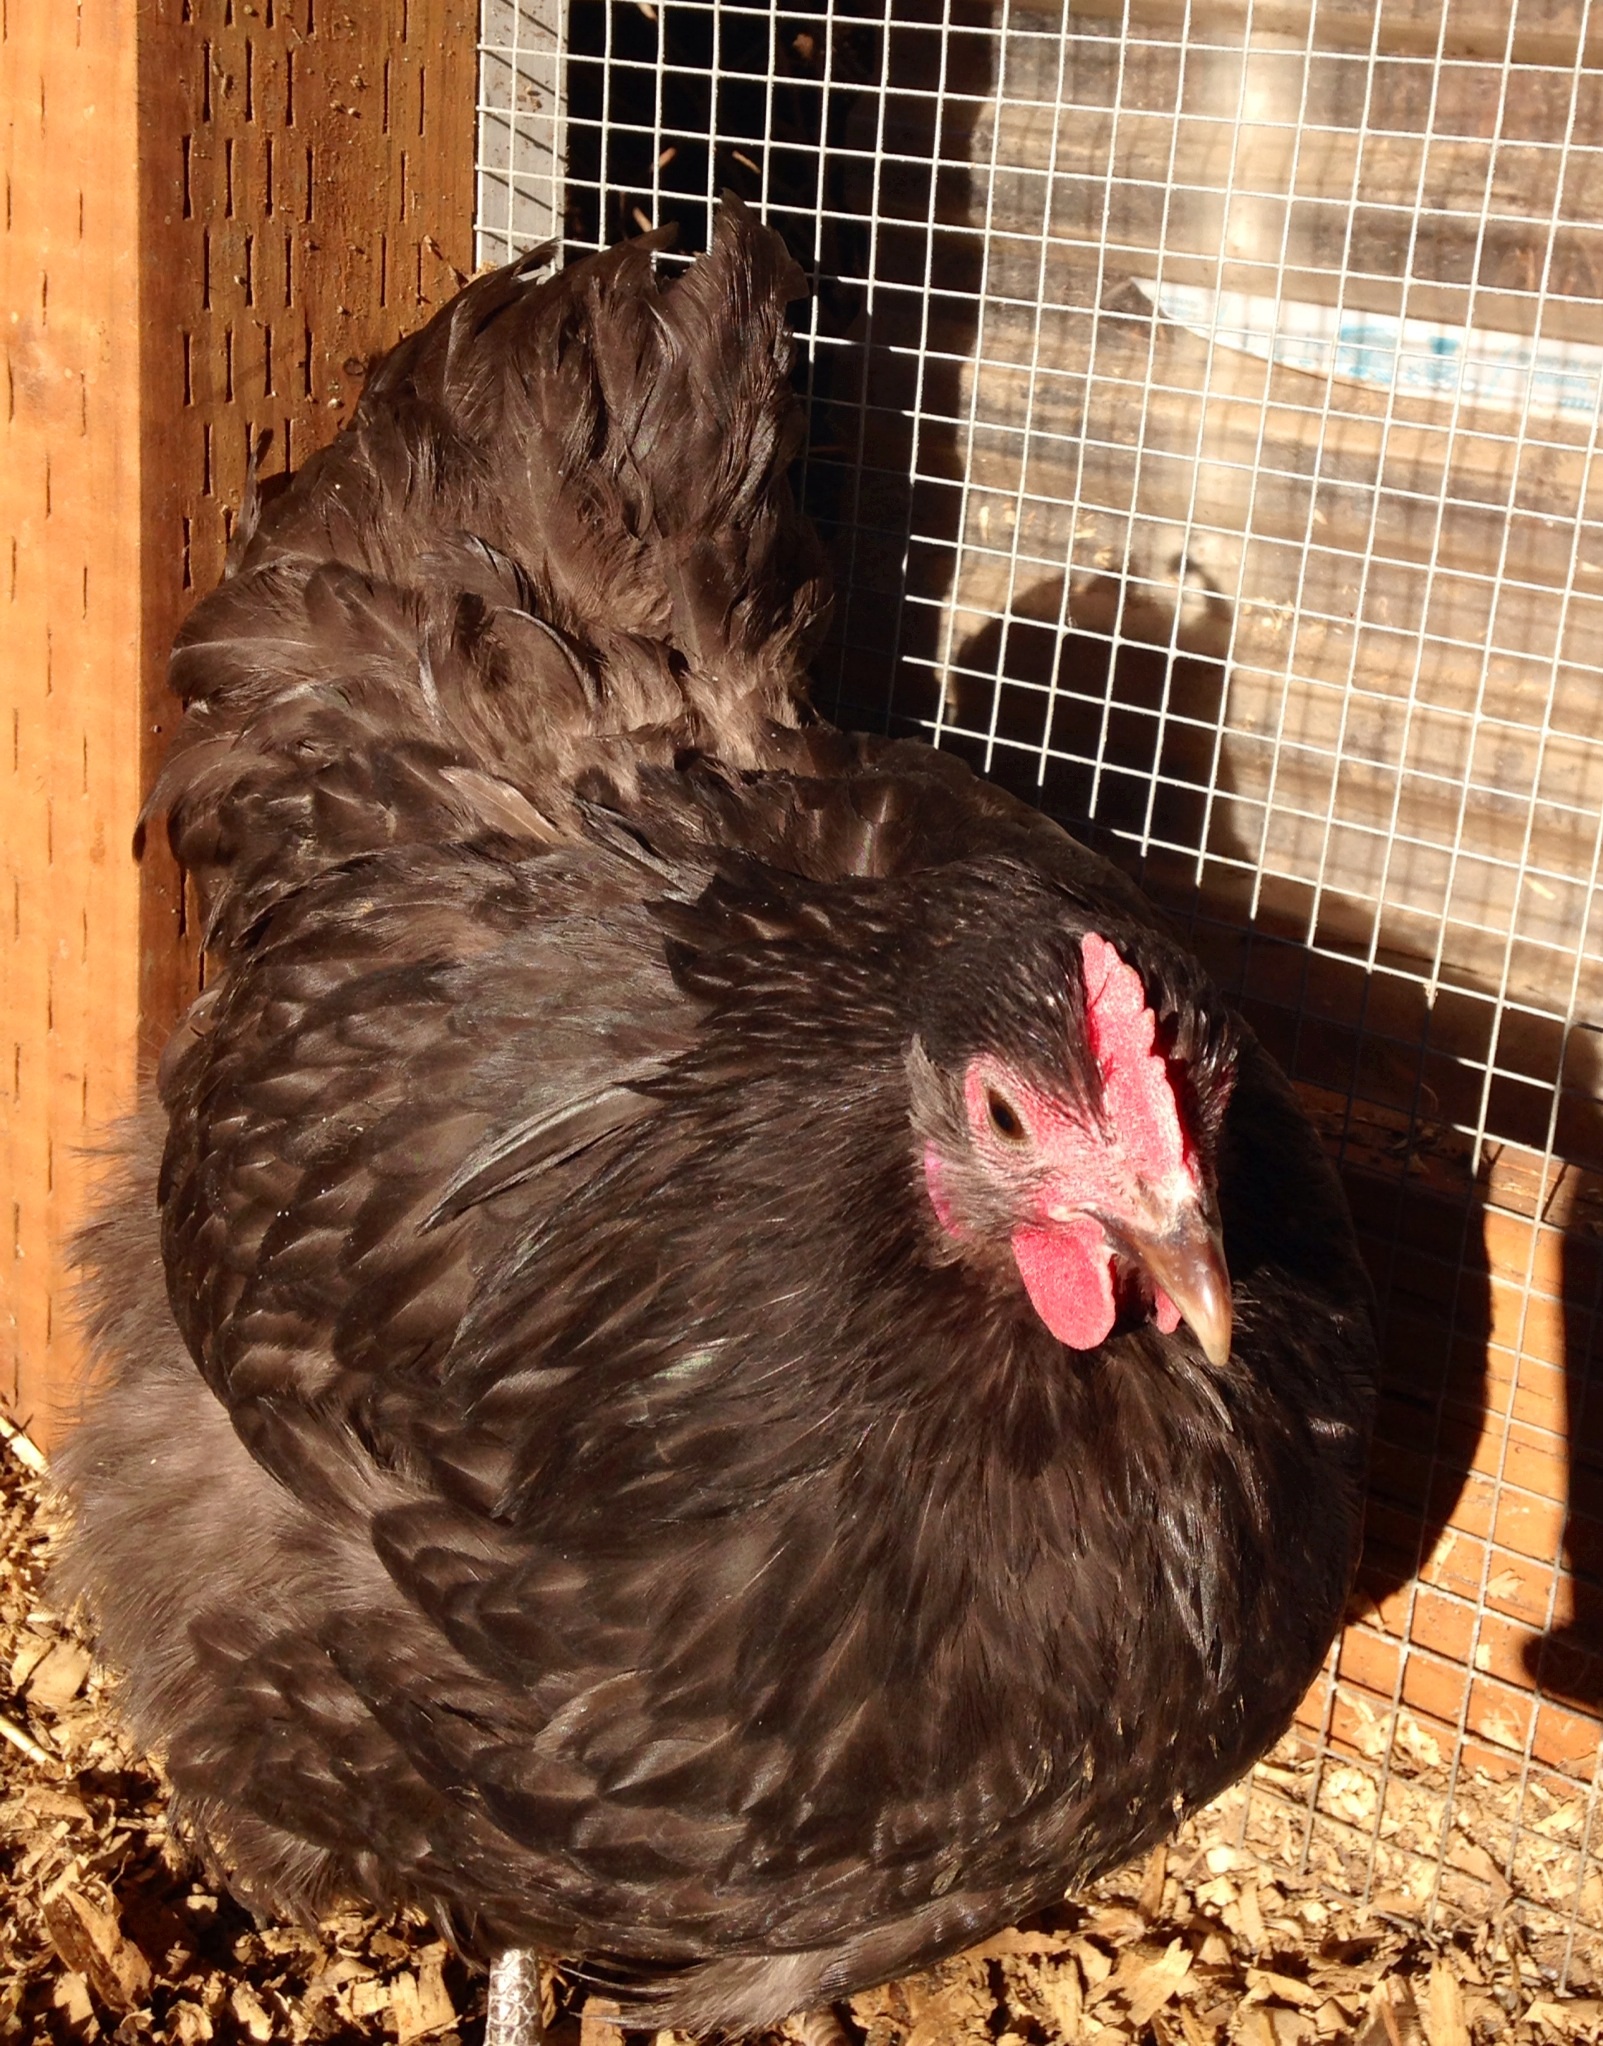 Large BANTAM English Chocolate Orpingtons. Extremely gentle and sweet hens and roosters. They actually prefer their coop to free ranging and are far too sweet to mix into a flock of Rhode Island Reds or other dominant breeds. I am breeding for large size, sweetness, and conformity to English standards.
Fertile Eggs Available for $3 each in the Portland, OR area call or text Amanda 971-241-9874
I am willing to ship. If eggs must be shipped they will be $40 per dozen plus actual shipping cost from 97267 to you.